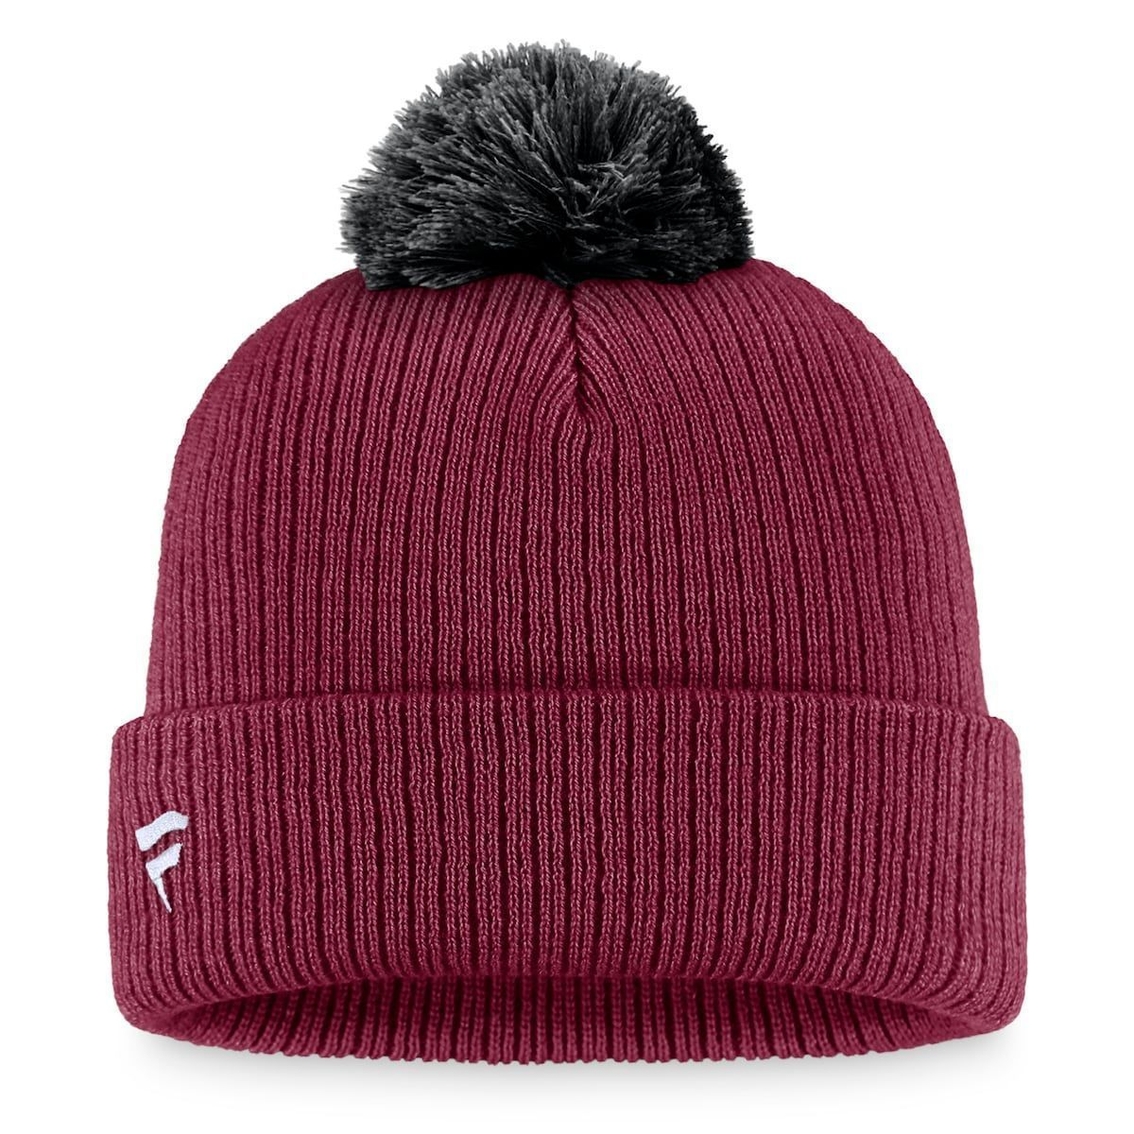 Fanatics Branded Men's Burgundy Colorado Avalanche Team Cuffed Knit Hat with Pom - Image 3 of 3